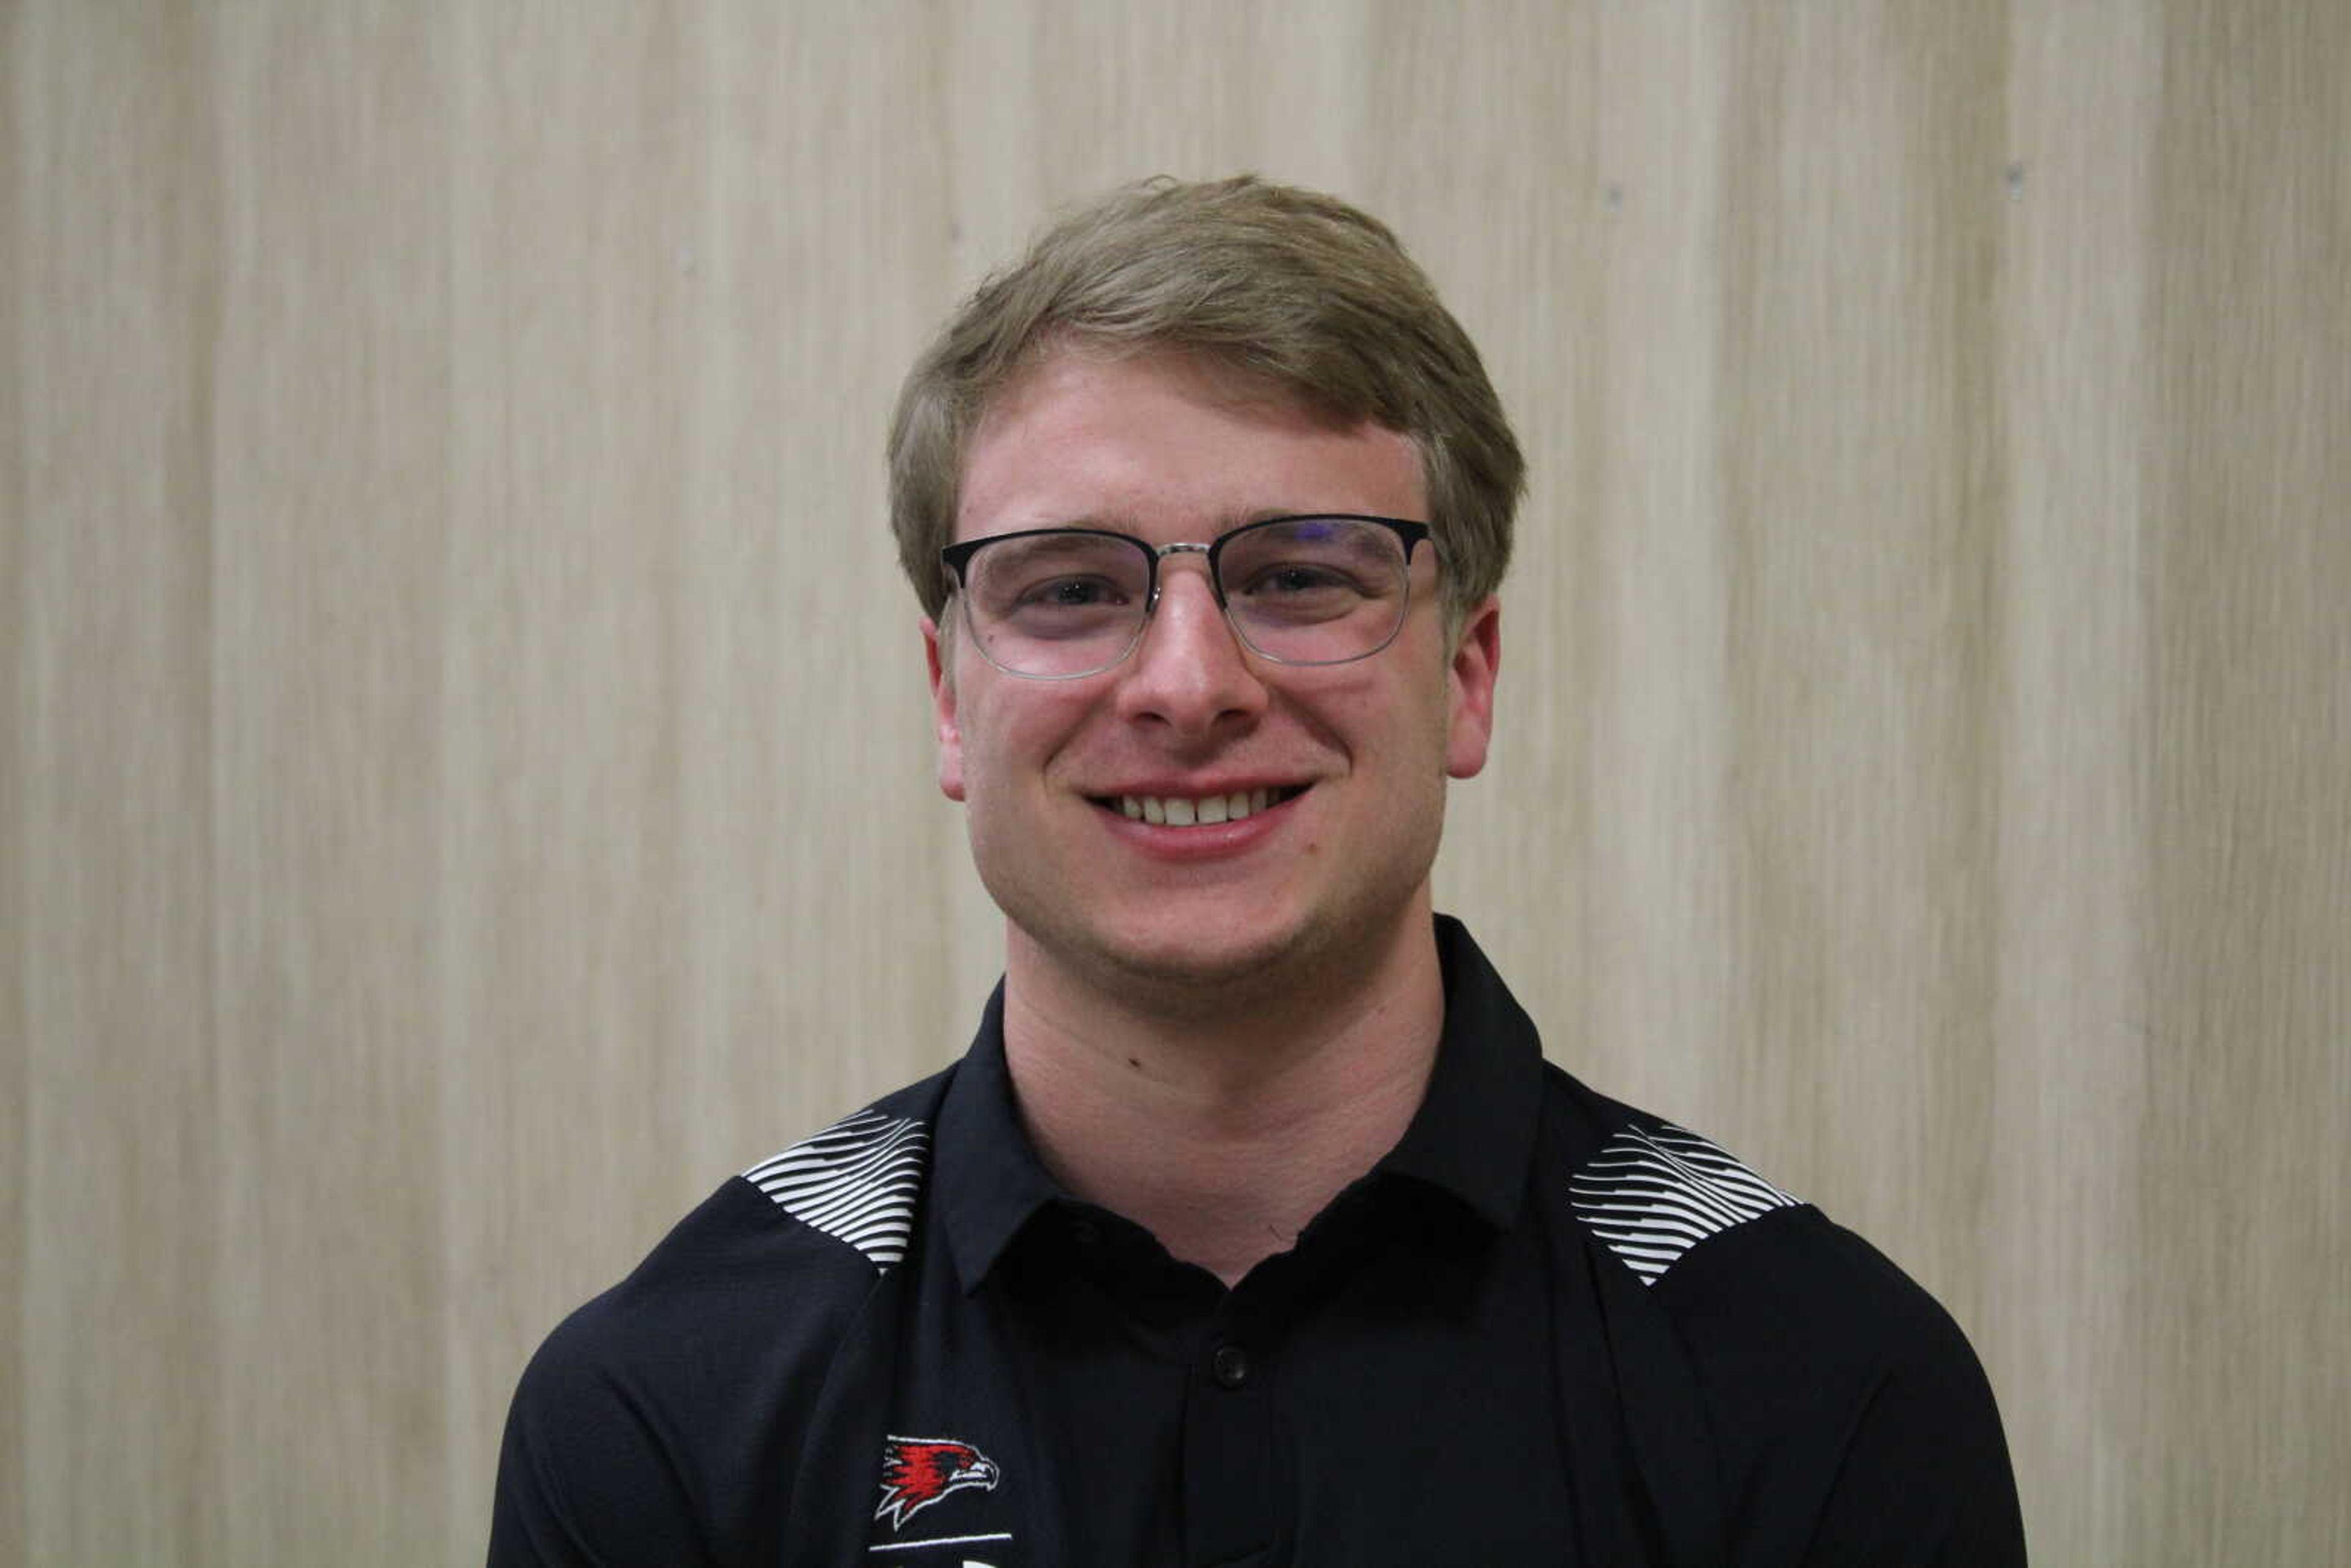 Sophomore sports management major Andrew Wildhaber will serve as the student body treasurer for the 2023-24 school year. Wildhaber received 619 votes during the student election.